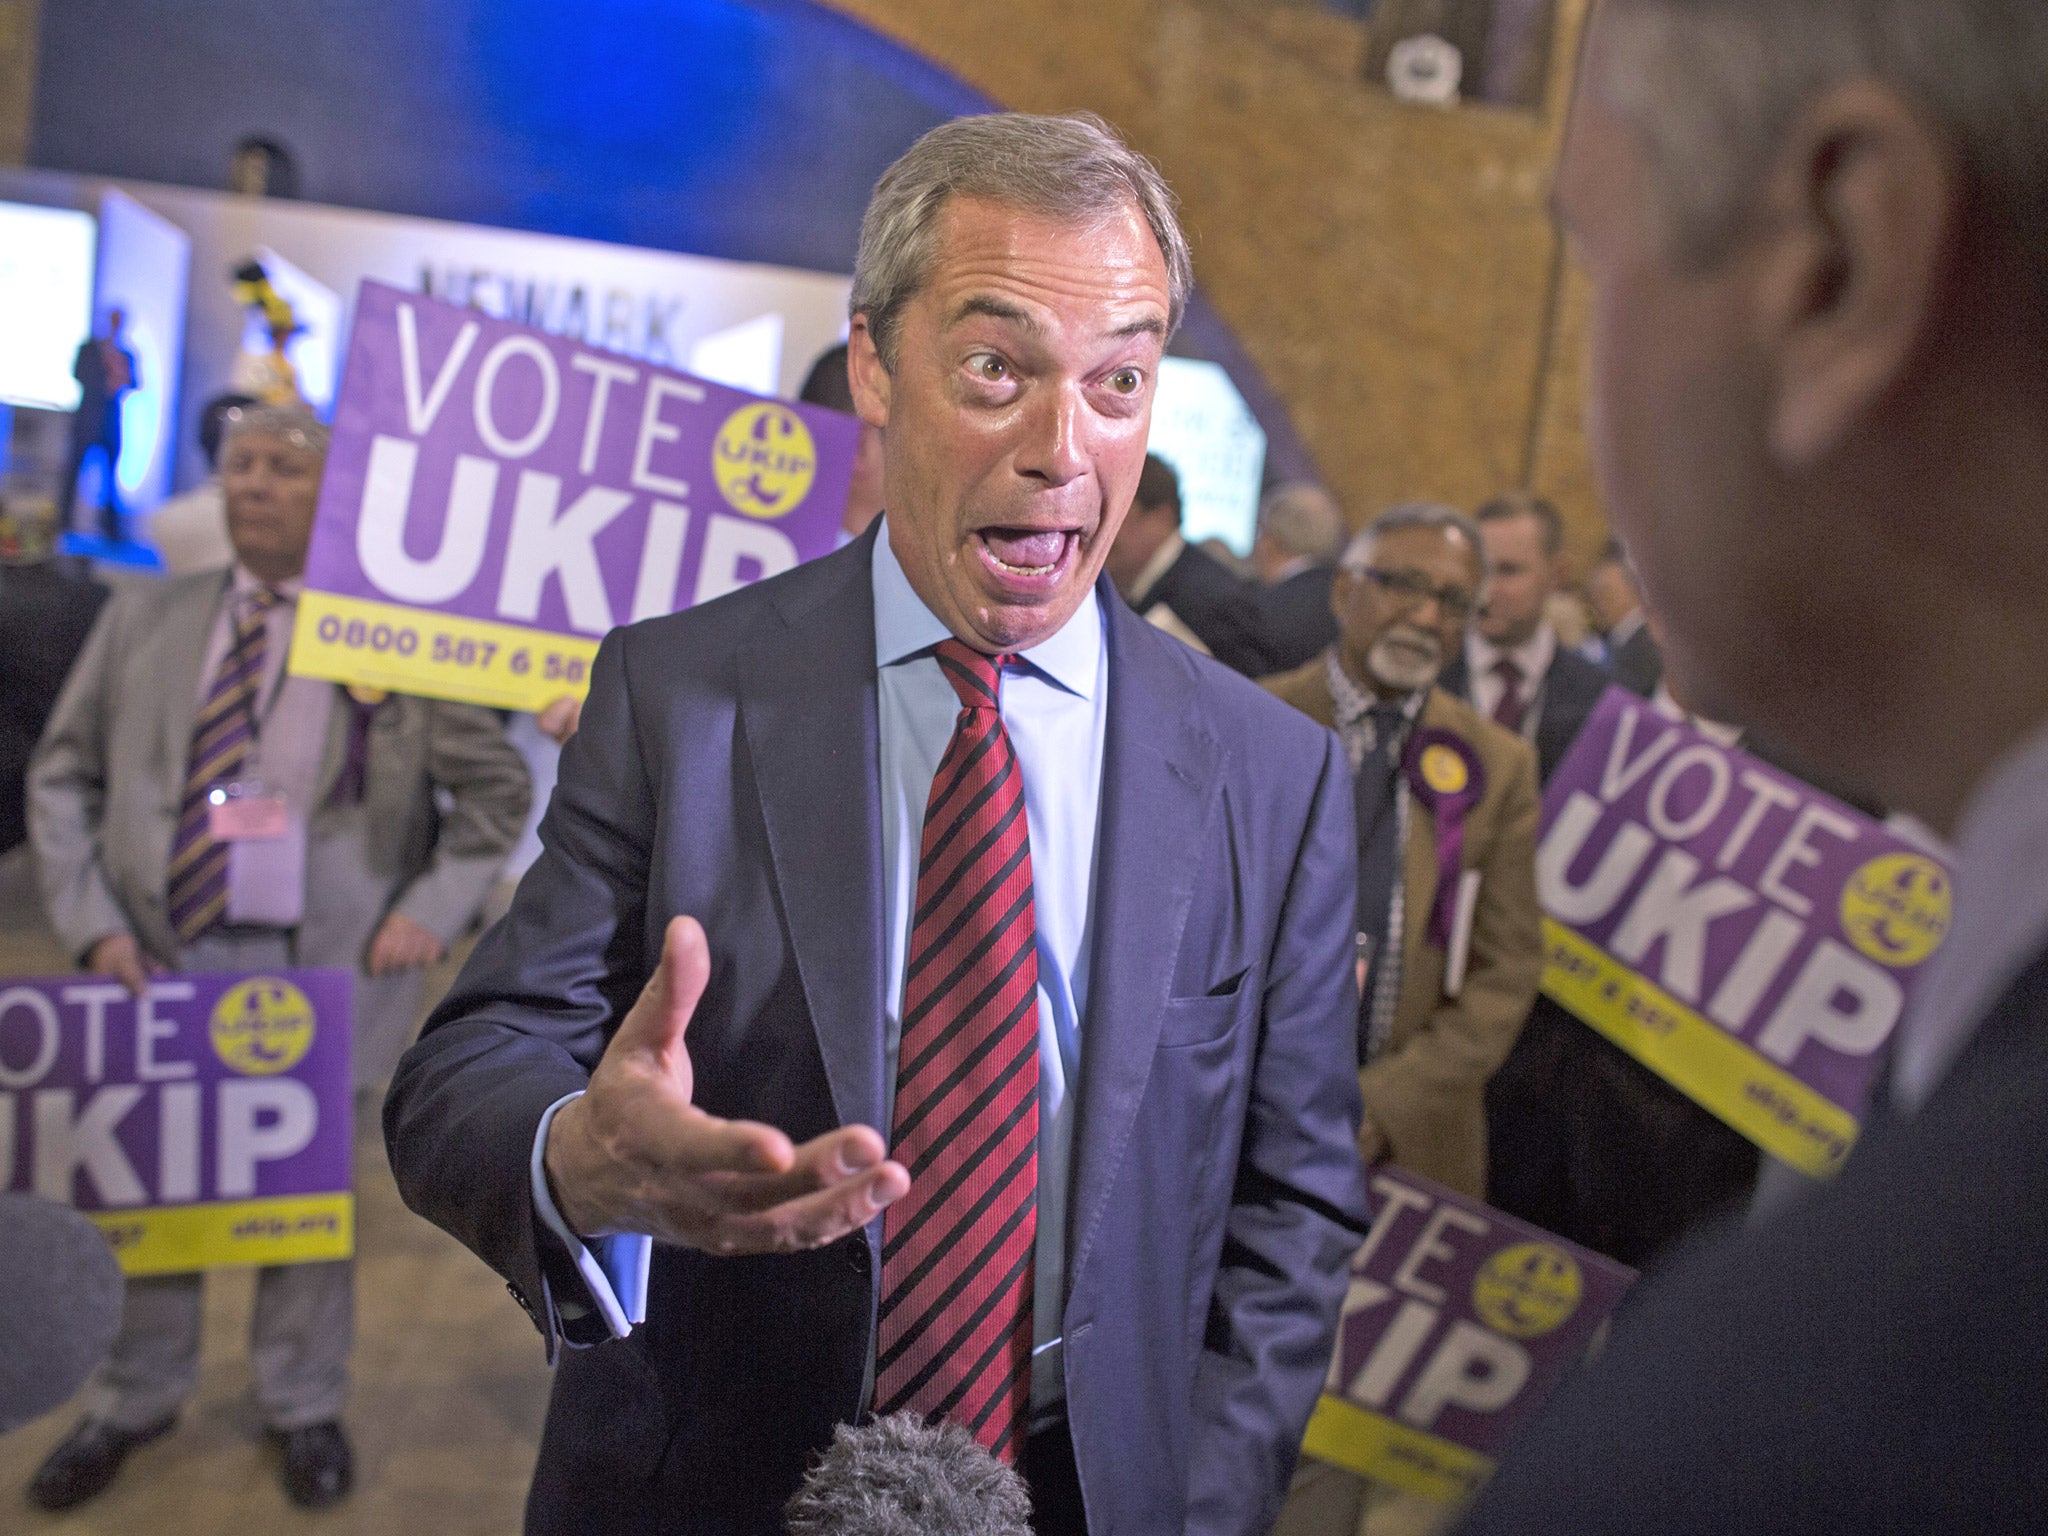 Nigel Farage's party is appealing to disillusioned Labour supporters